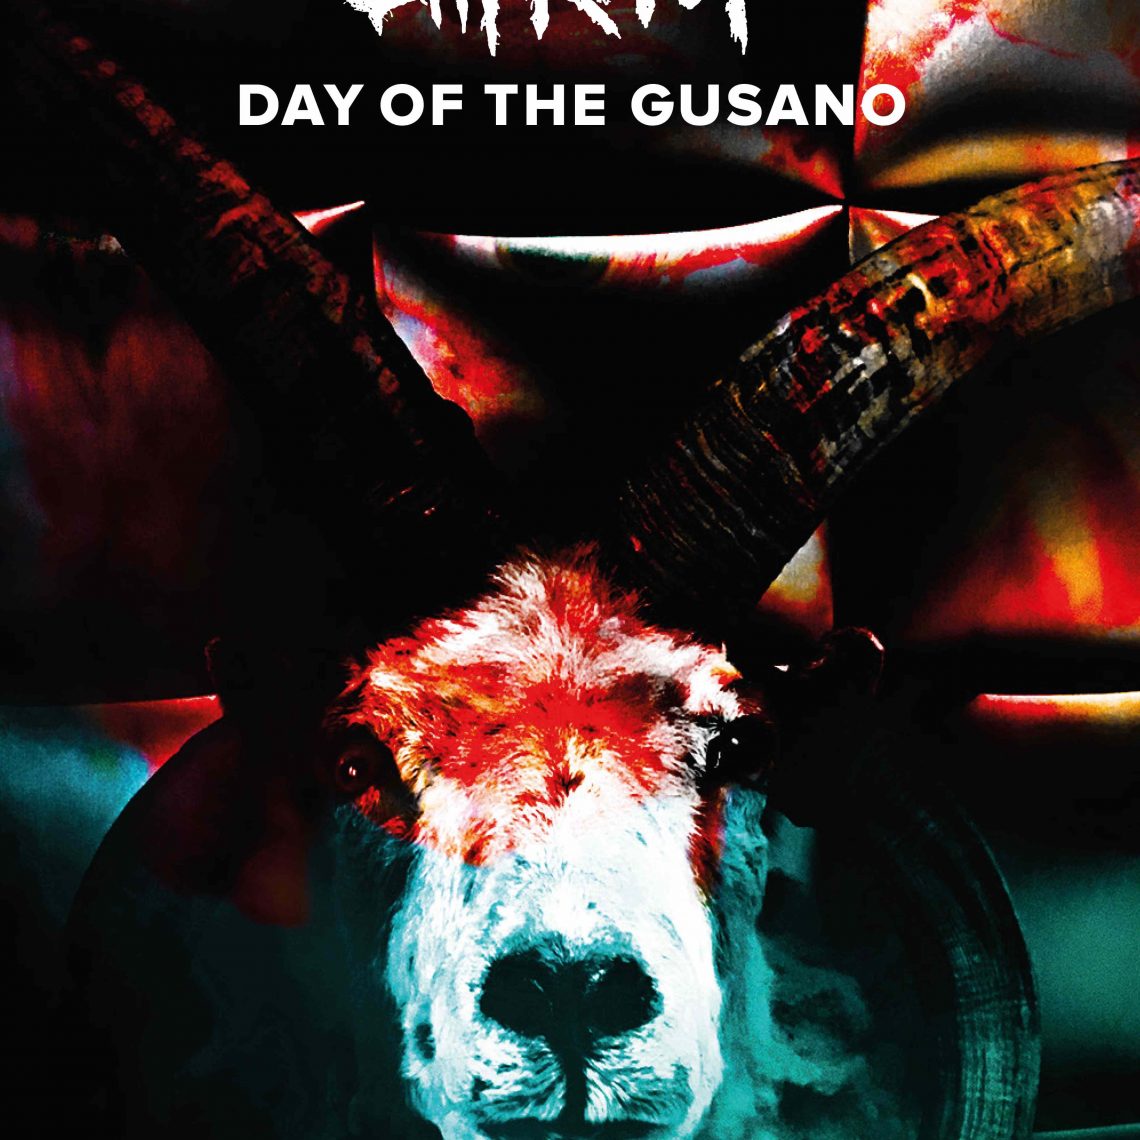 SLIPKNOT’s ‘Day of the Gusano’ tickets on sale now